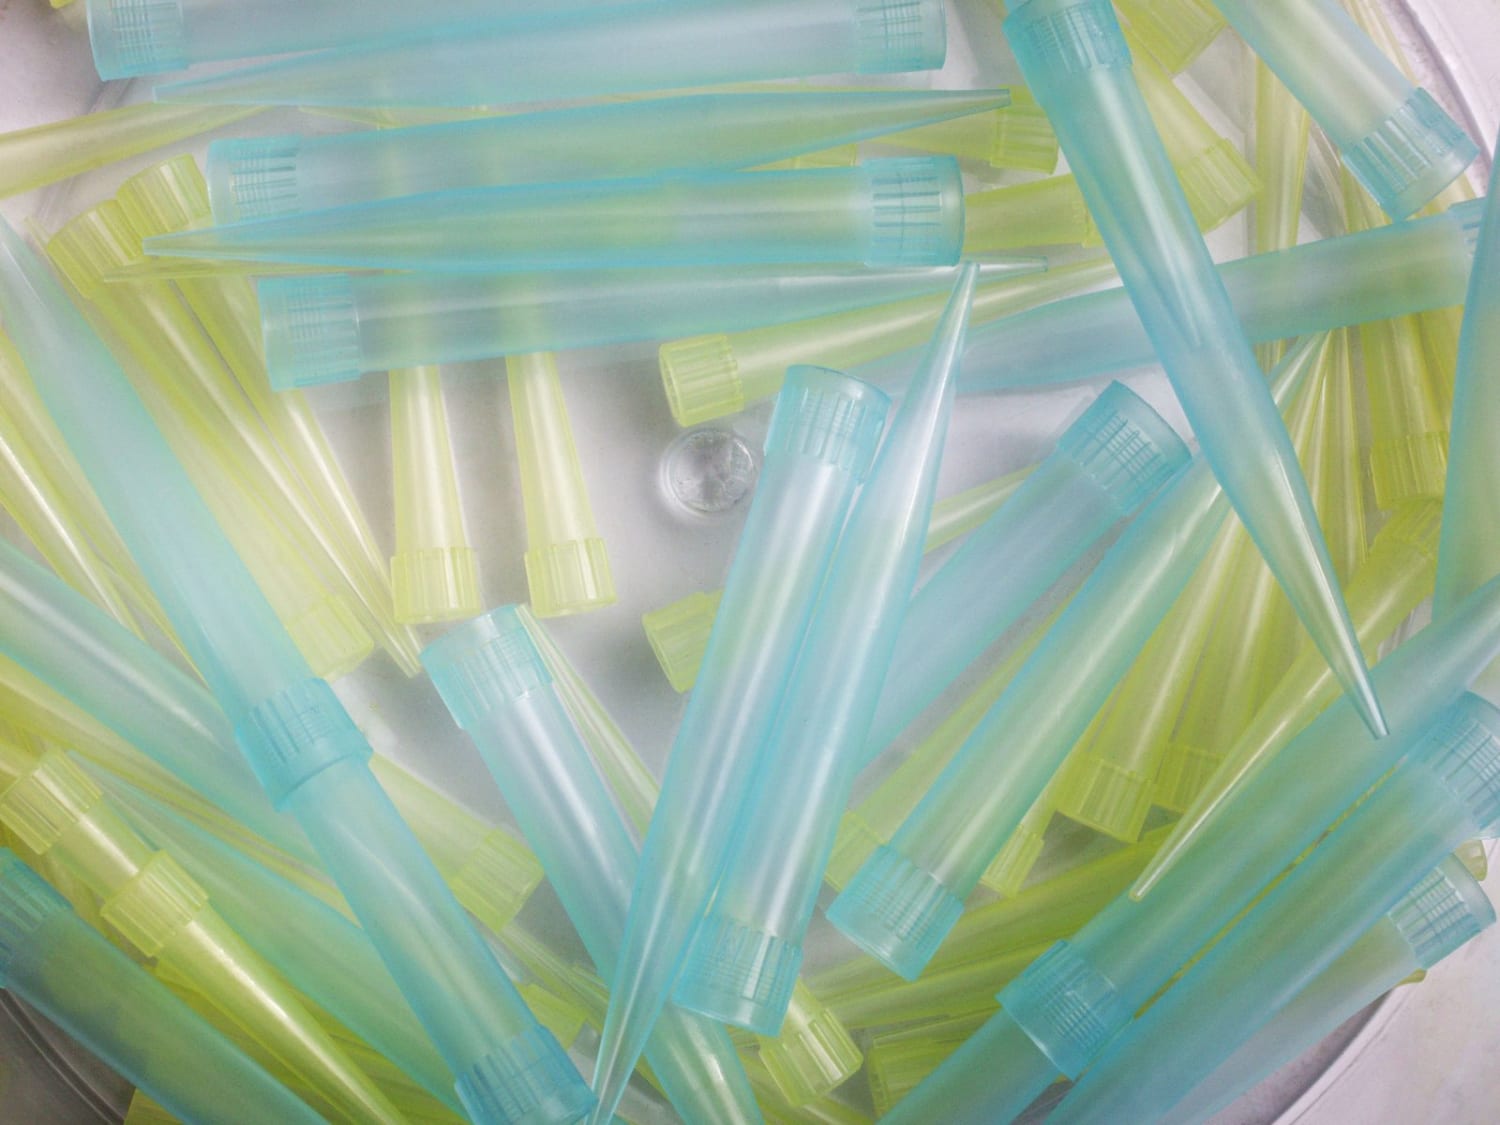 A Shortage of Plastic Pipette Tips Is Delaying Biology Research